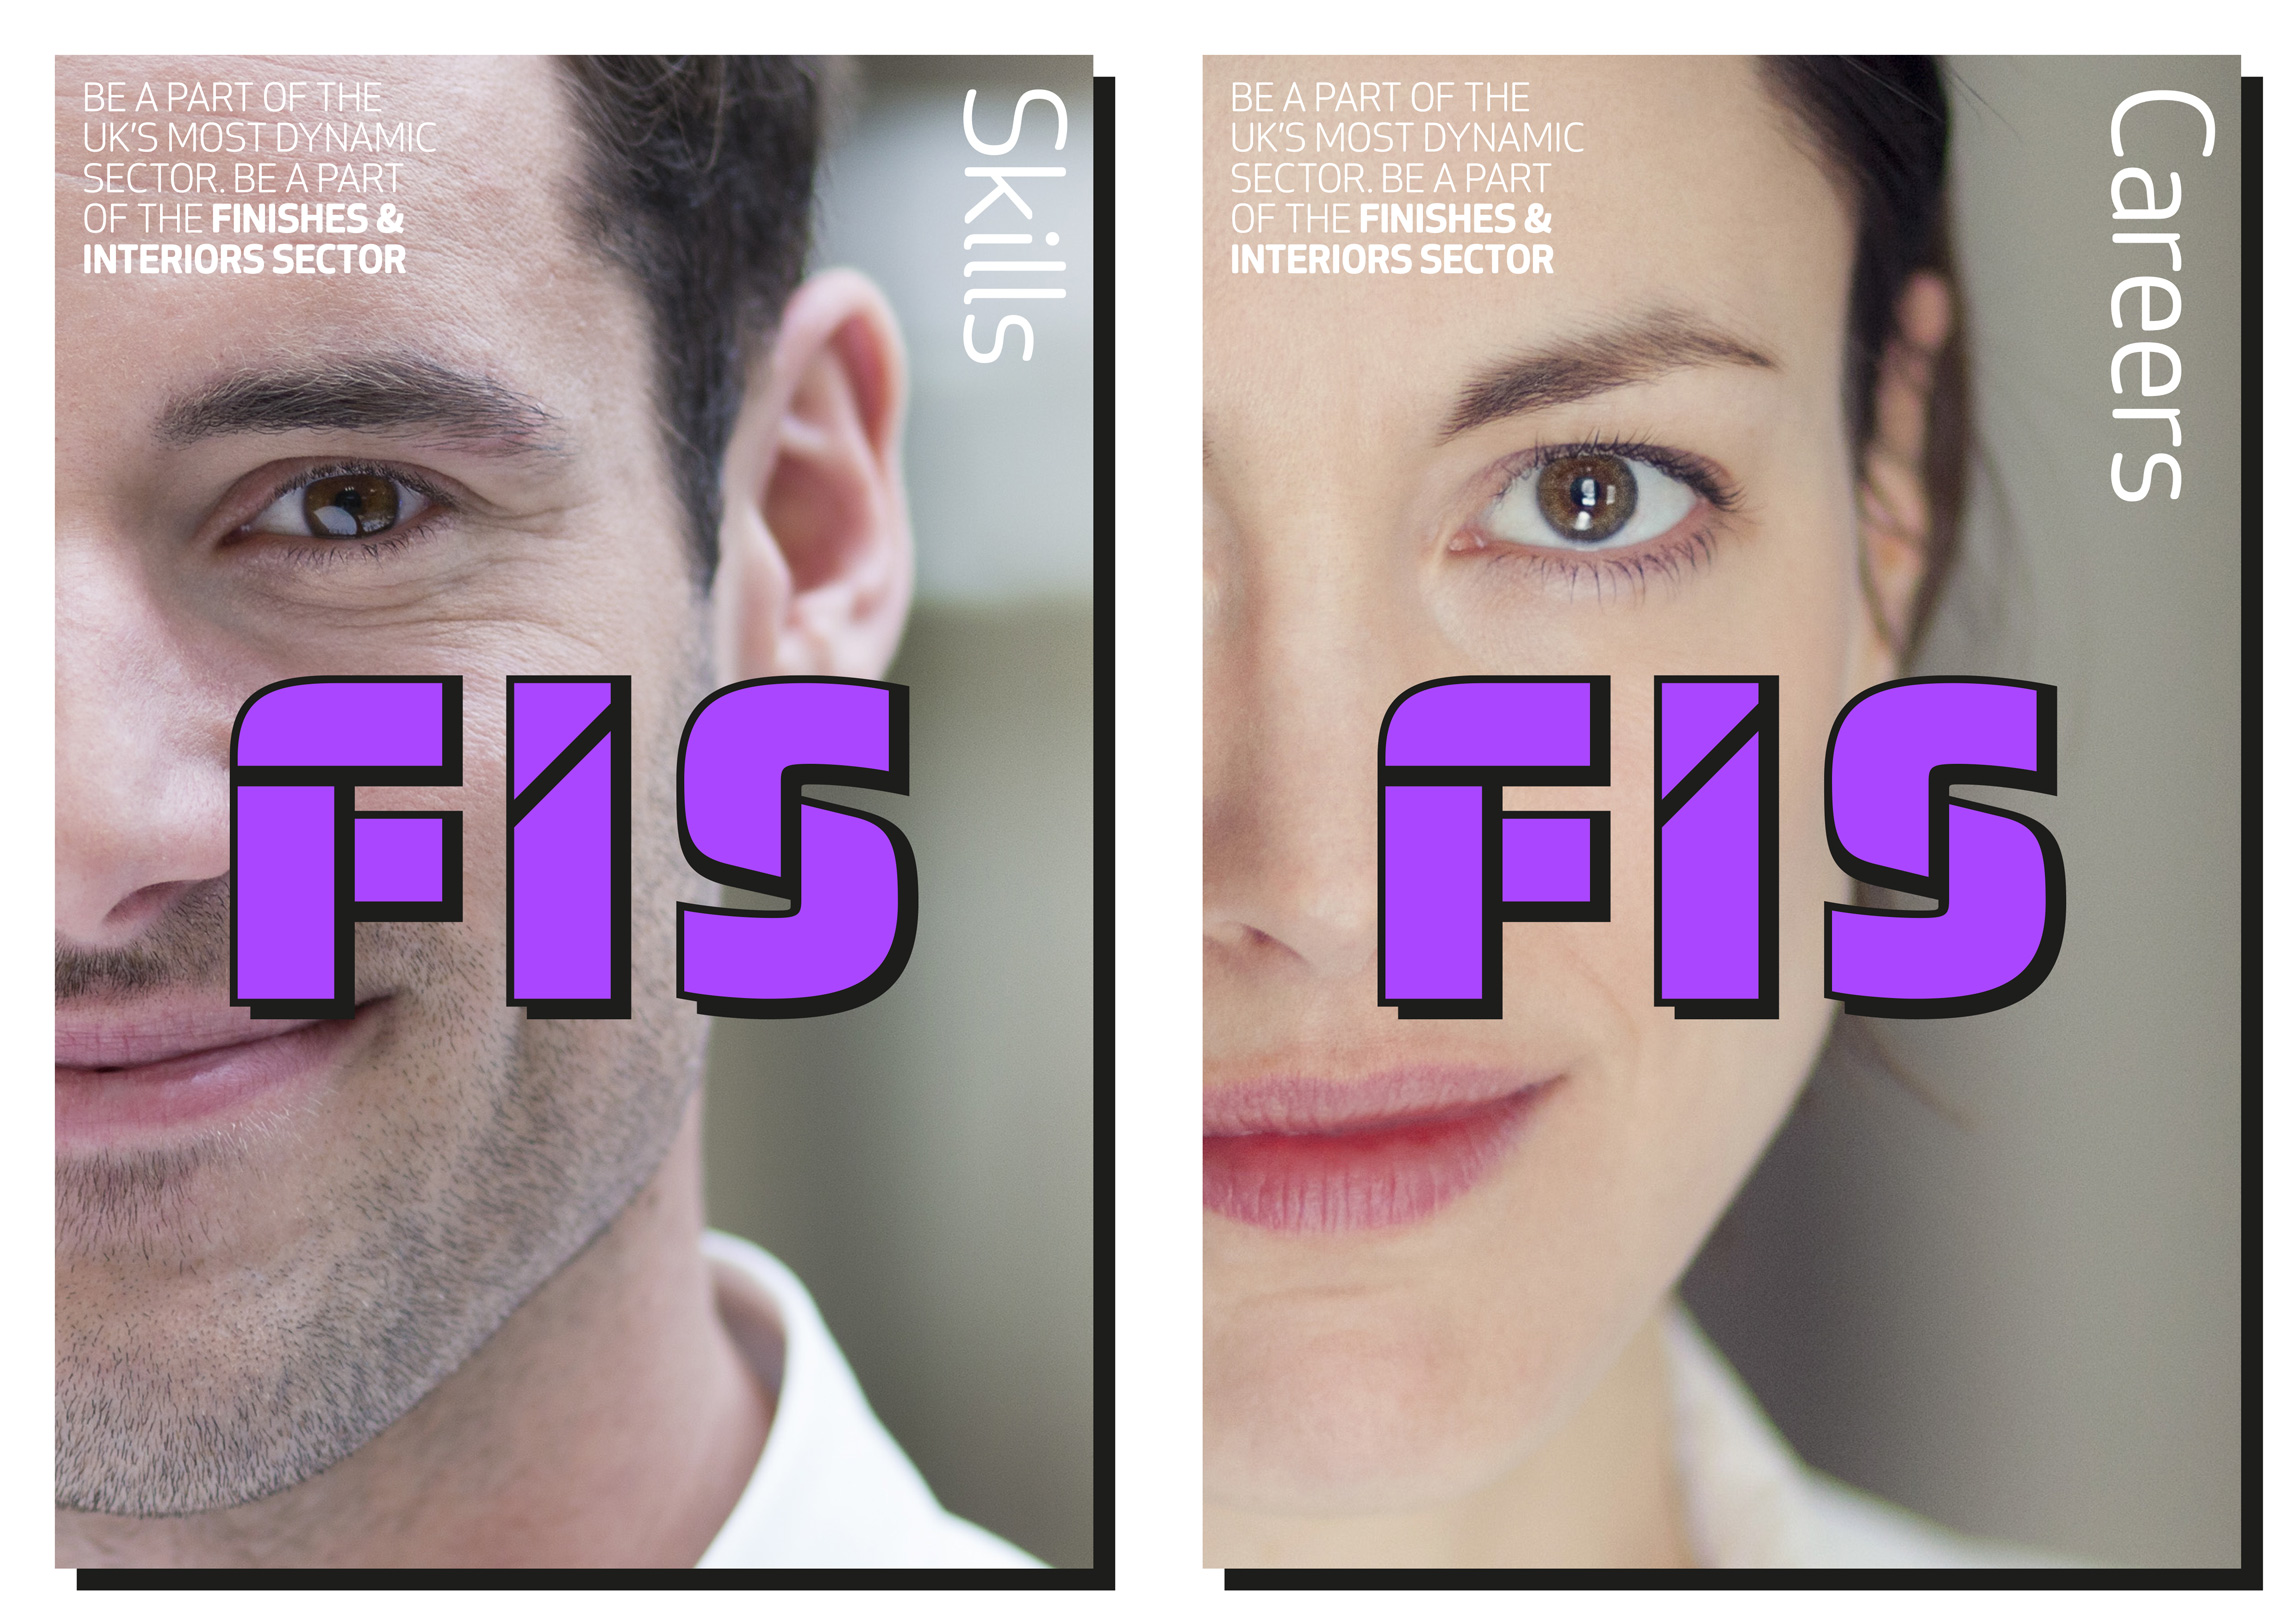 FIS finishes and interiors sector rebrand posters